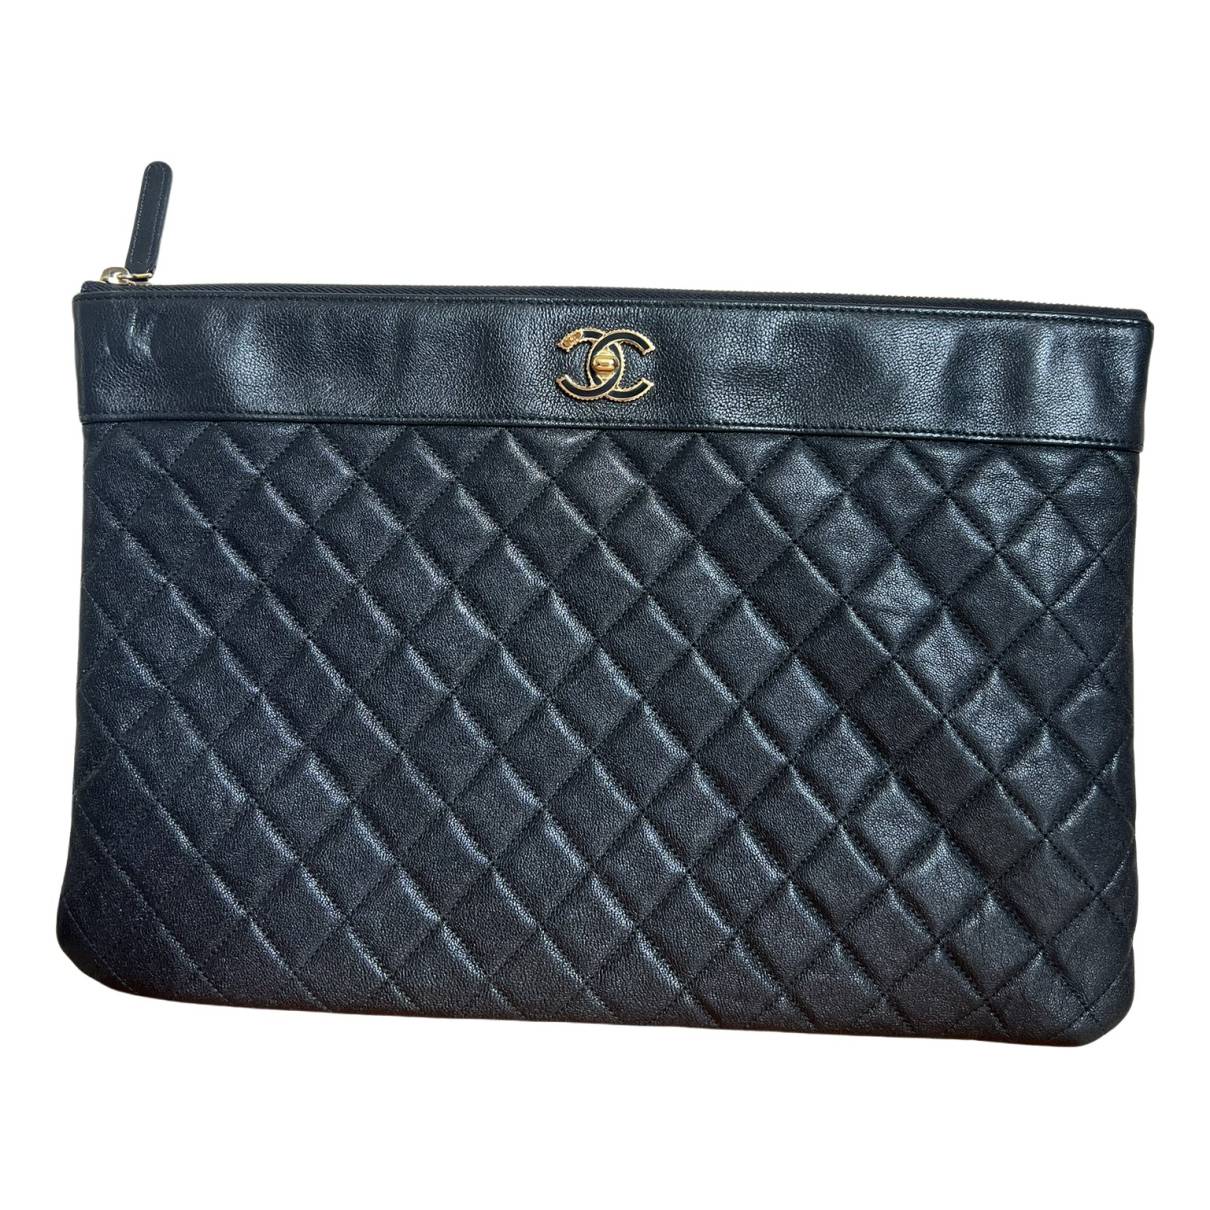 Timeless/classique leather clutch bag Chanel Black in Leather - 33961777